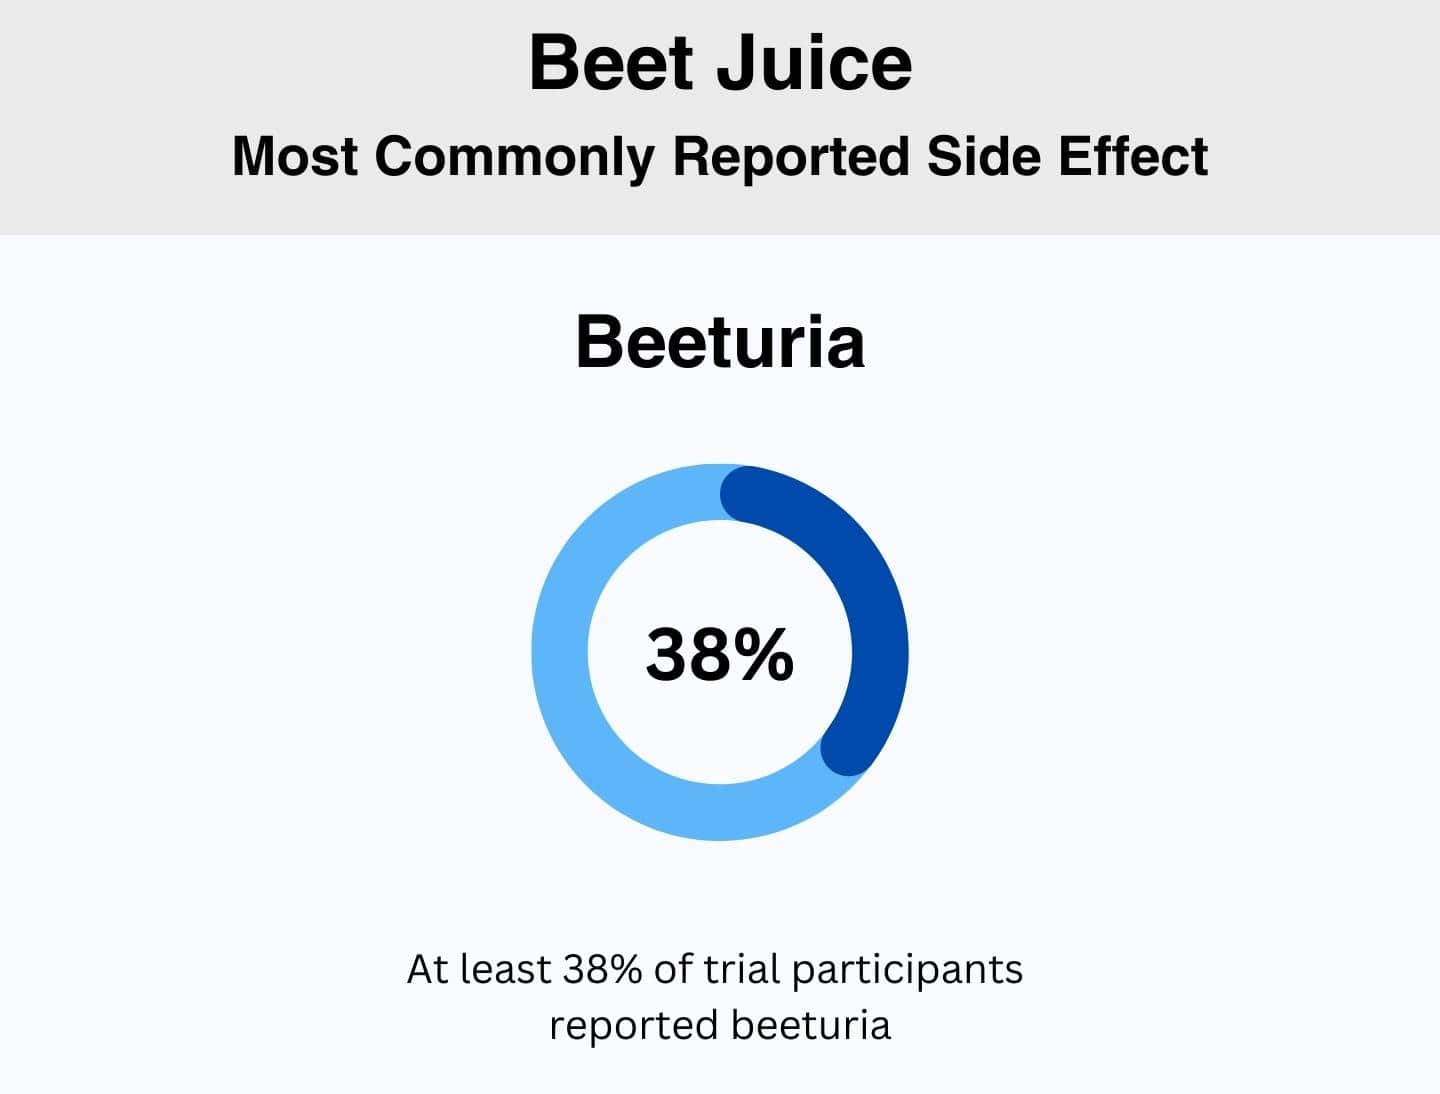 The most commonly reported side effect from drinking beet juice is beeturia (in at least 38% of trial participants).